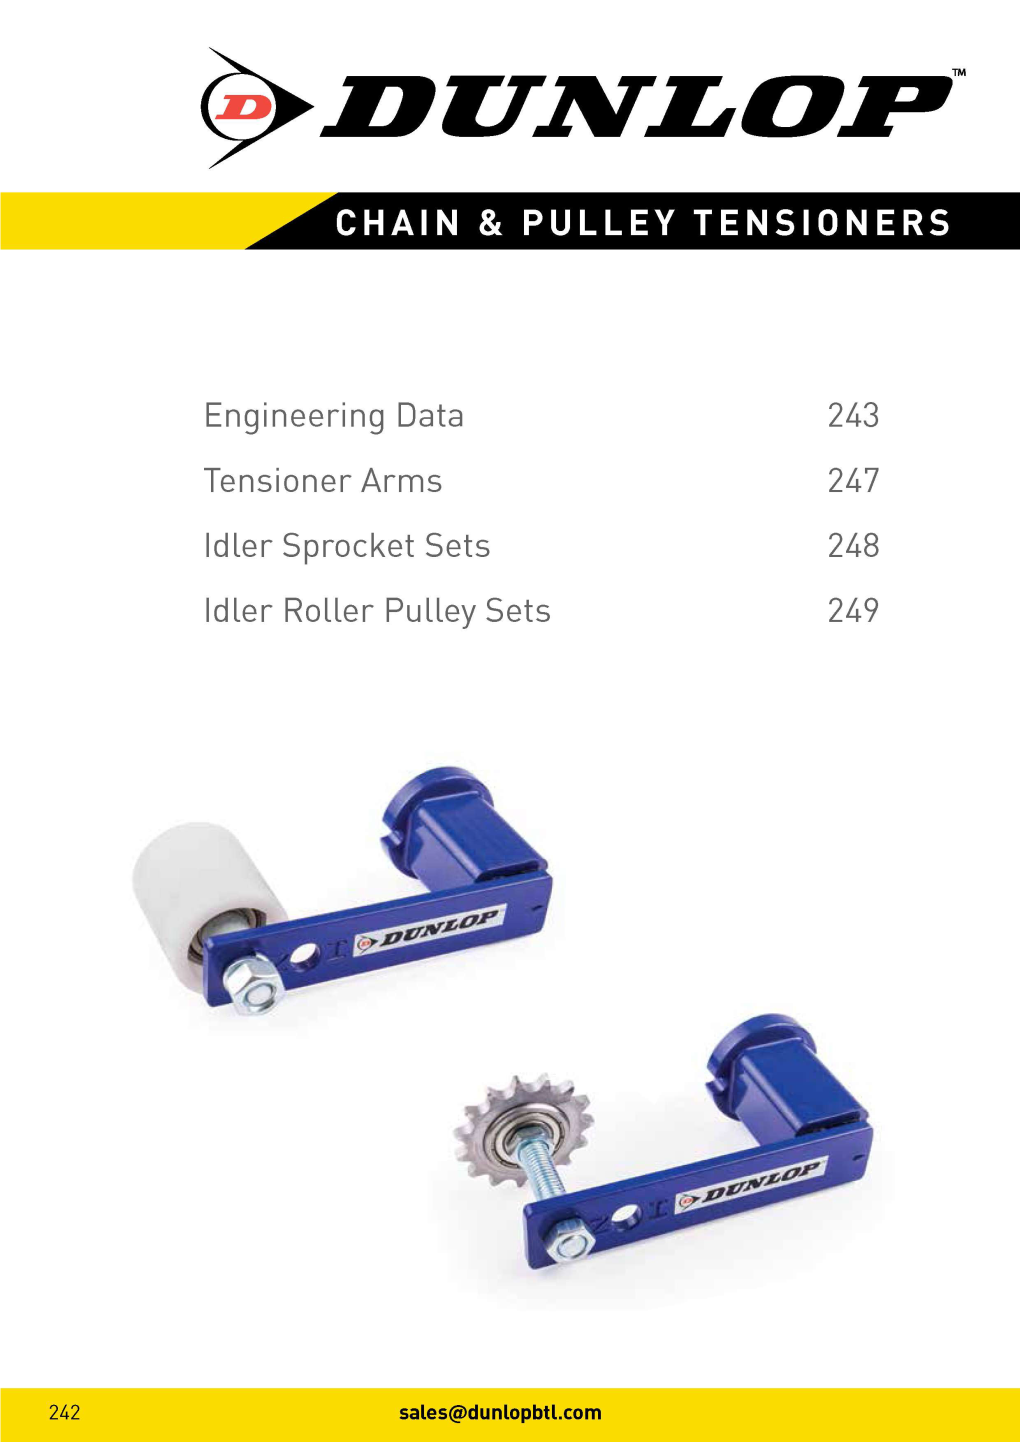 Chain & Pulley Tensioners